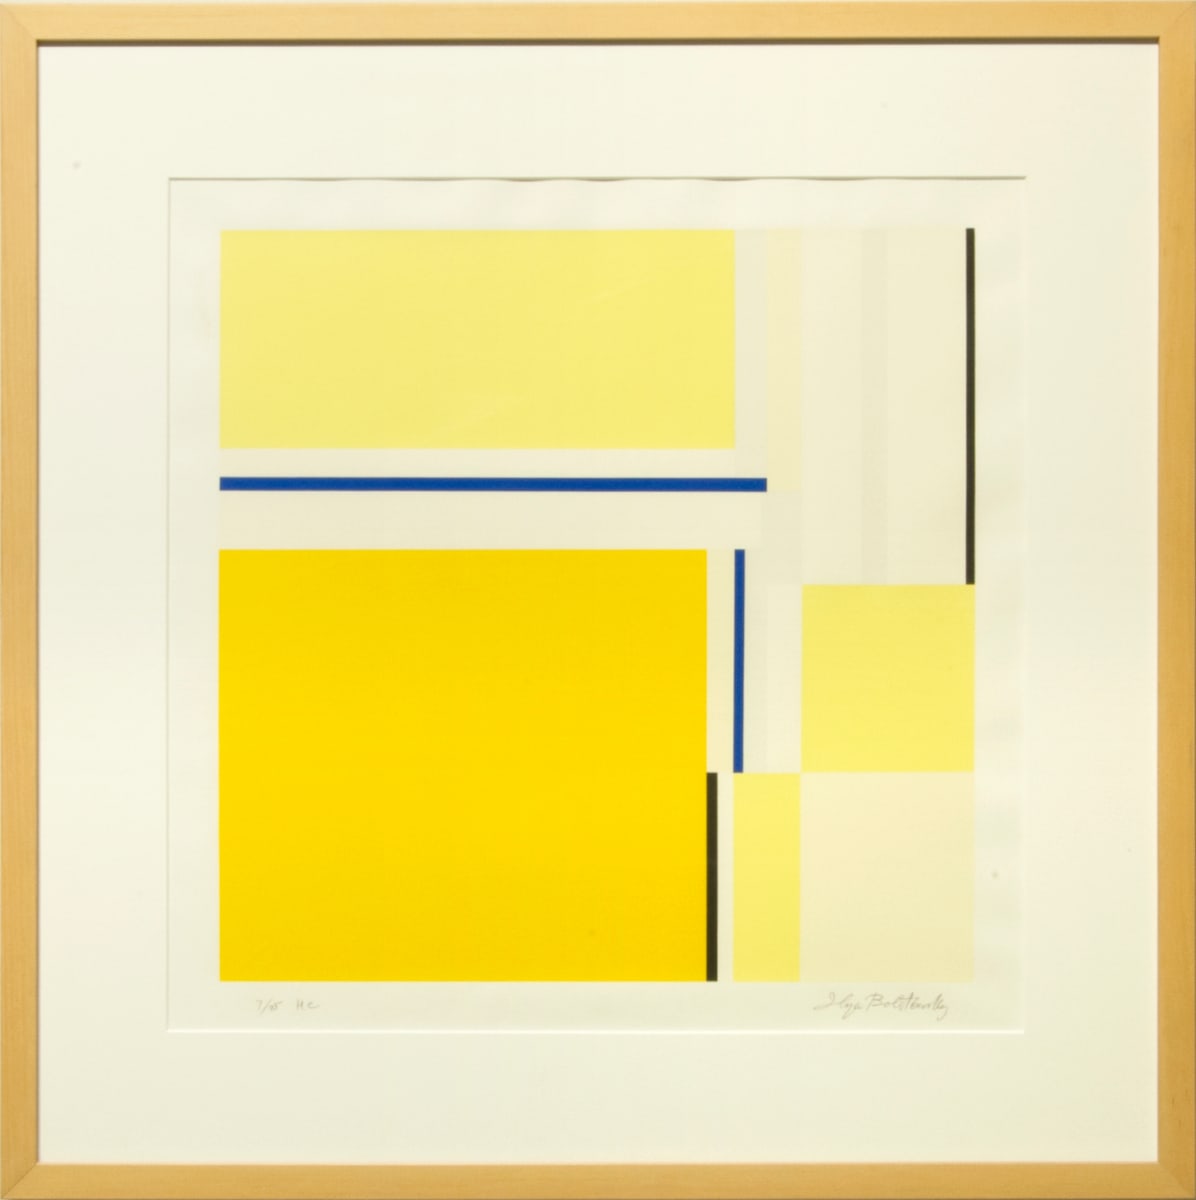 Untitled (Yellow Square) by Ilya Bolotowsky 